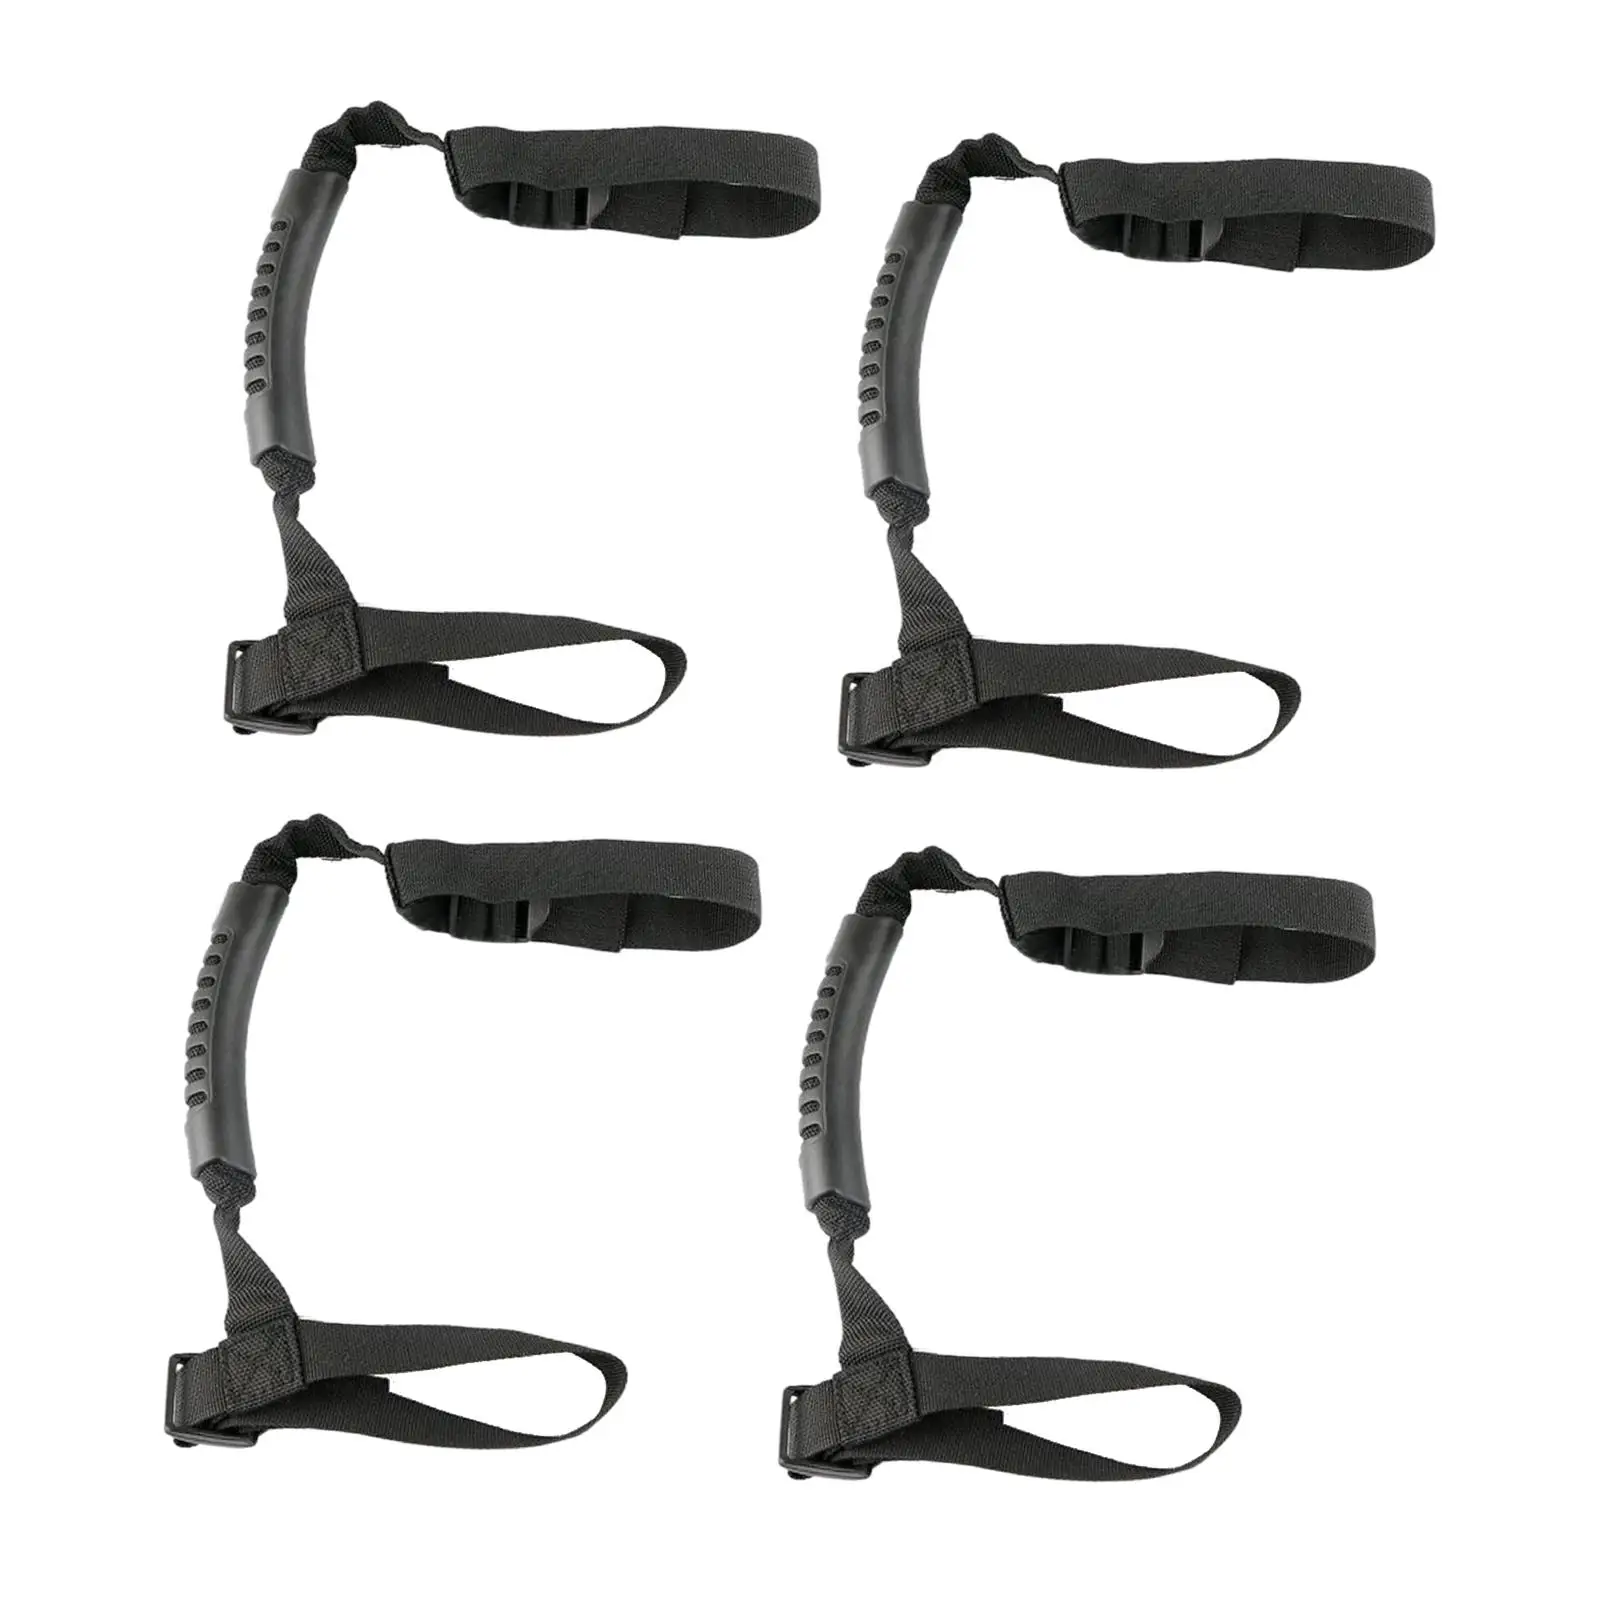 4 Pieces Grab Handles Grip Handle Replaces for Jeep Wrangler Easily Install and Put Off Professional Adjustable Straps